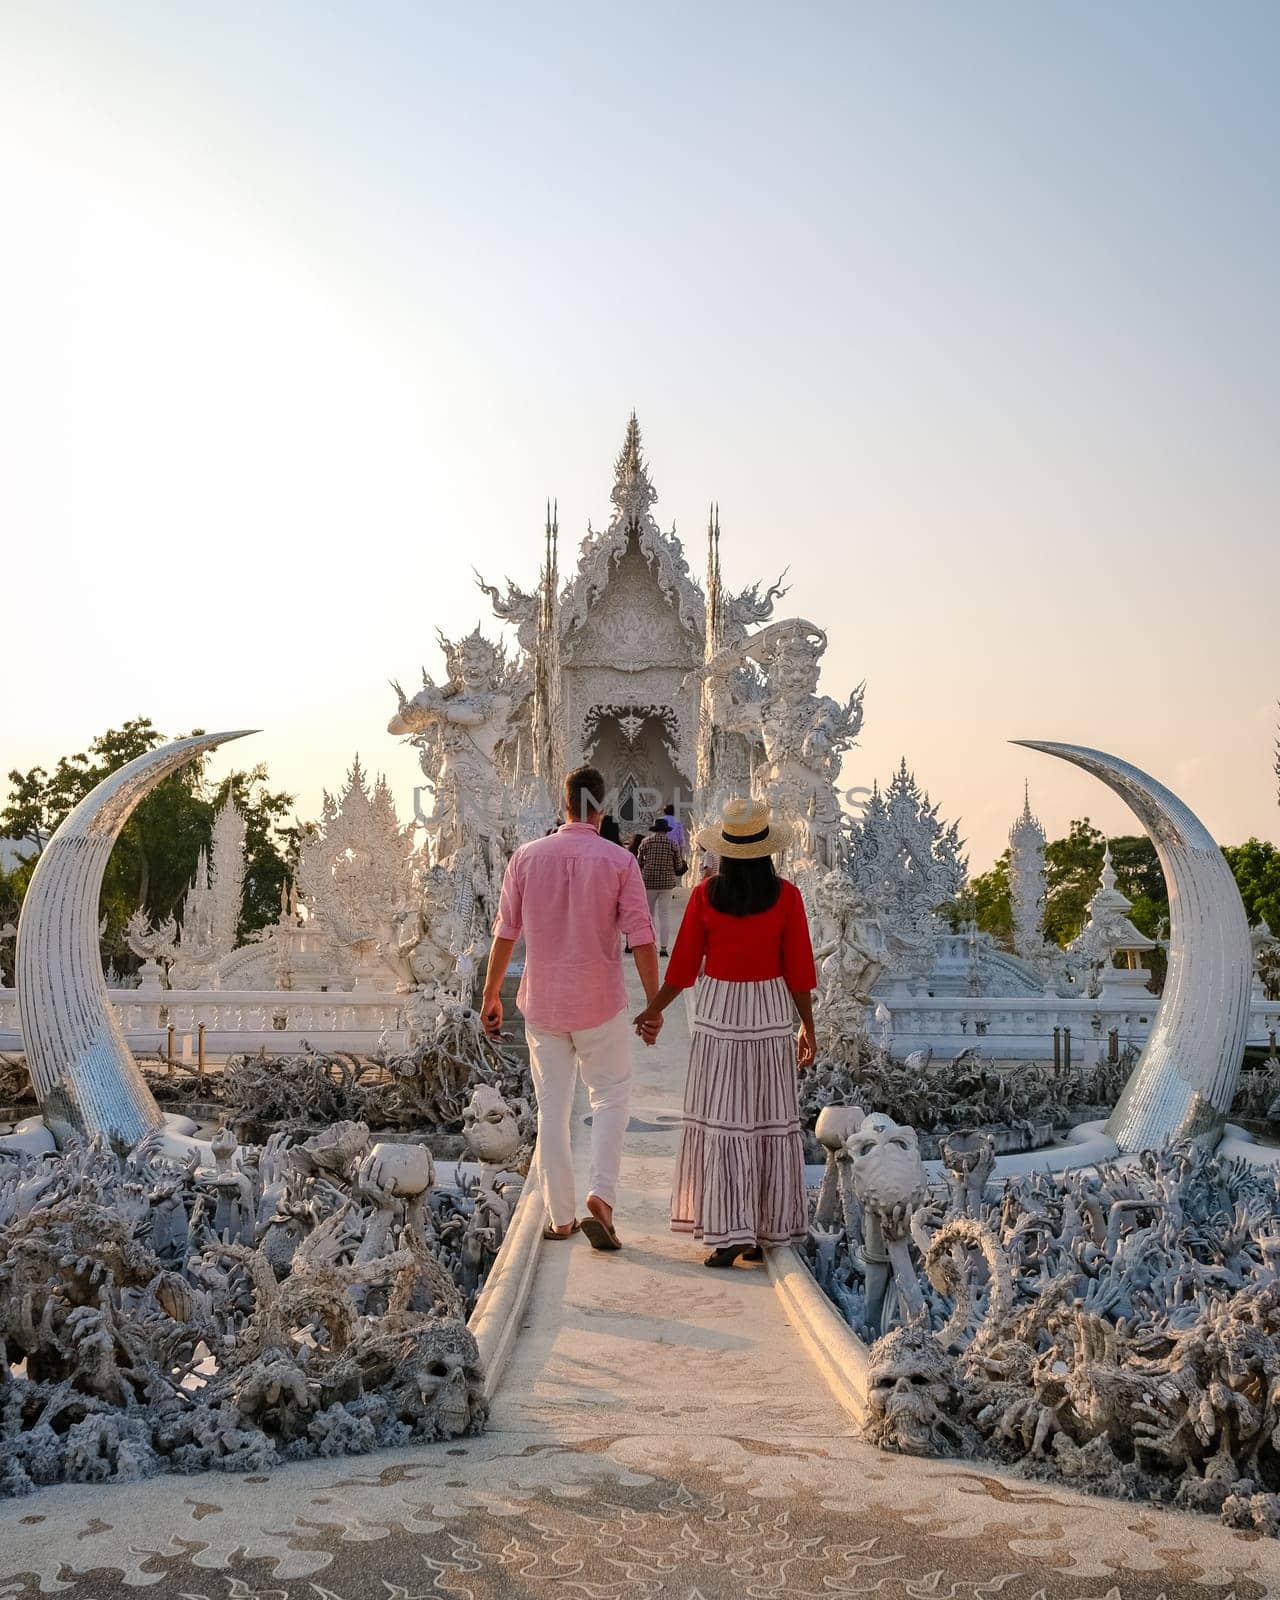 White Temple Chiang Rai Thailand,a diverse couple of men and women visit Wat Rong Khun temple at sunset, Northern Thailand.